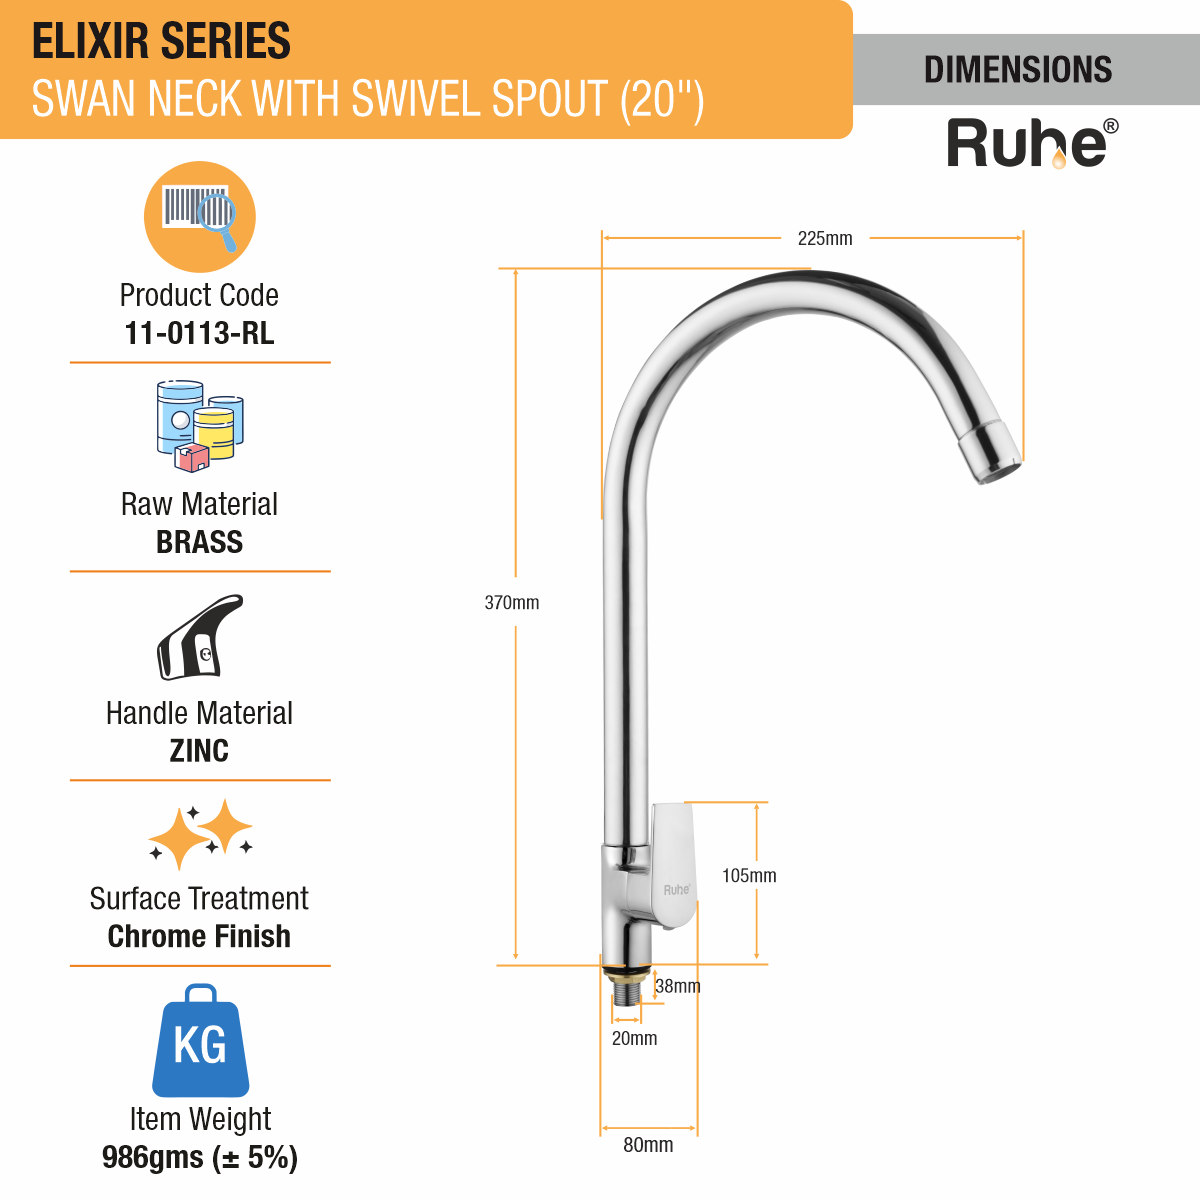 Elixir Swan Neck with Large (20 inches) Round Swivel Spout Faucet dimensions and size